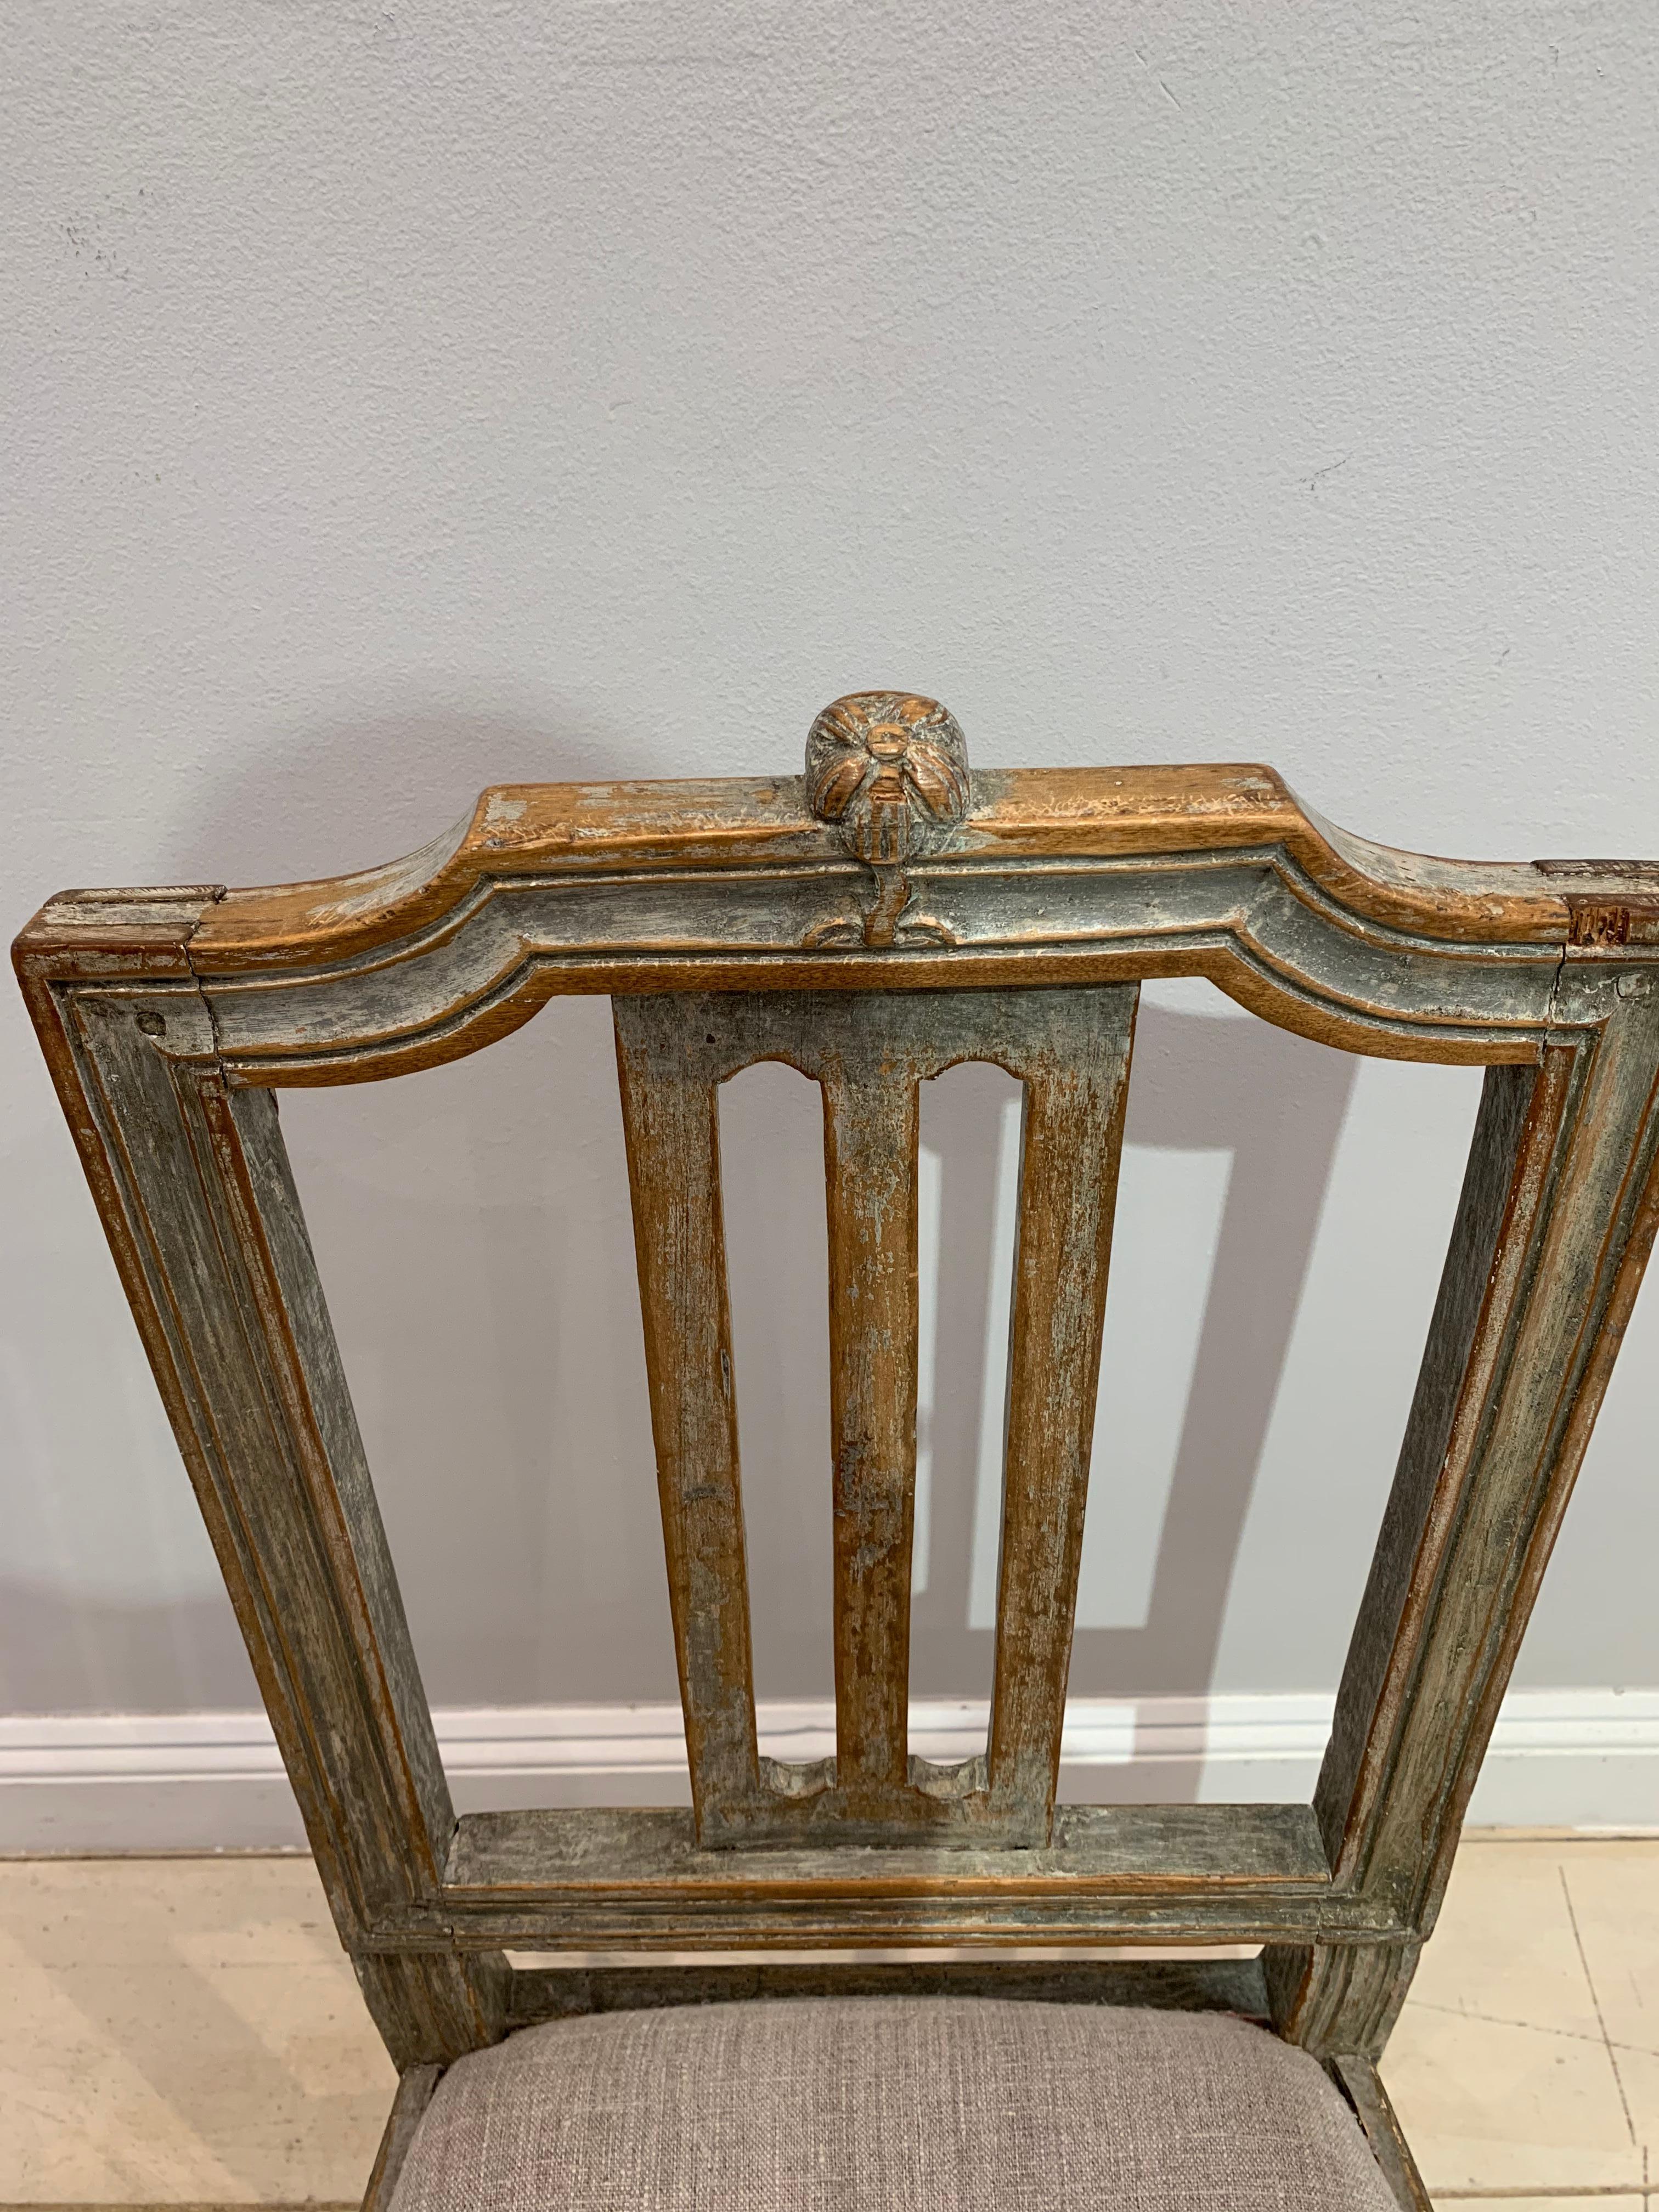 Delightful painted Swedish Gustavian chair from the late 18th century.
It has a decorative carved wood flower at the top, retains much of its original paint and has a drop in seat covered in neutral linen.
Likely from the Lindome region of Sweden,